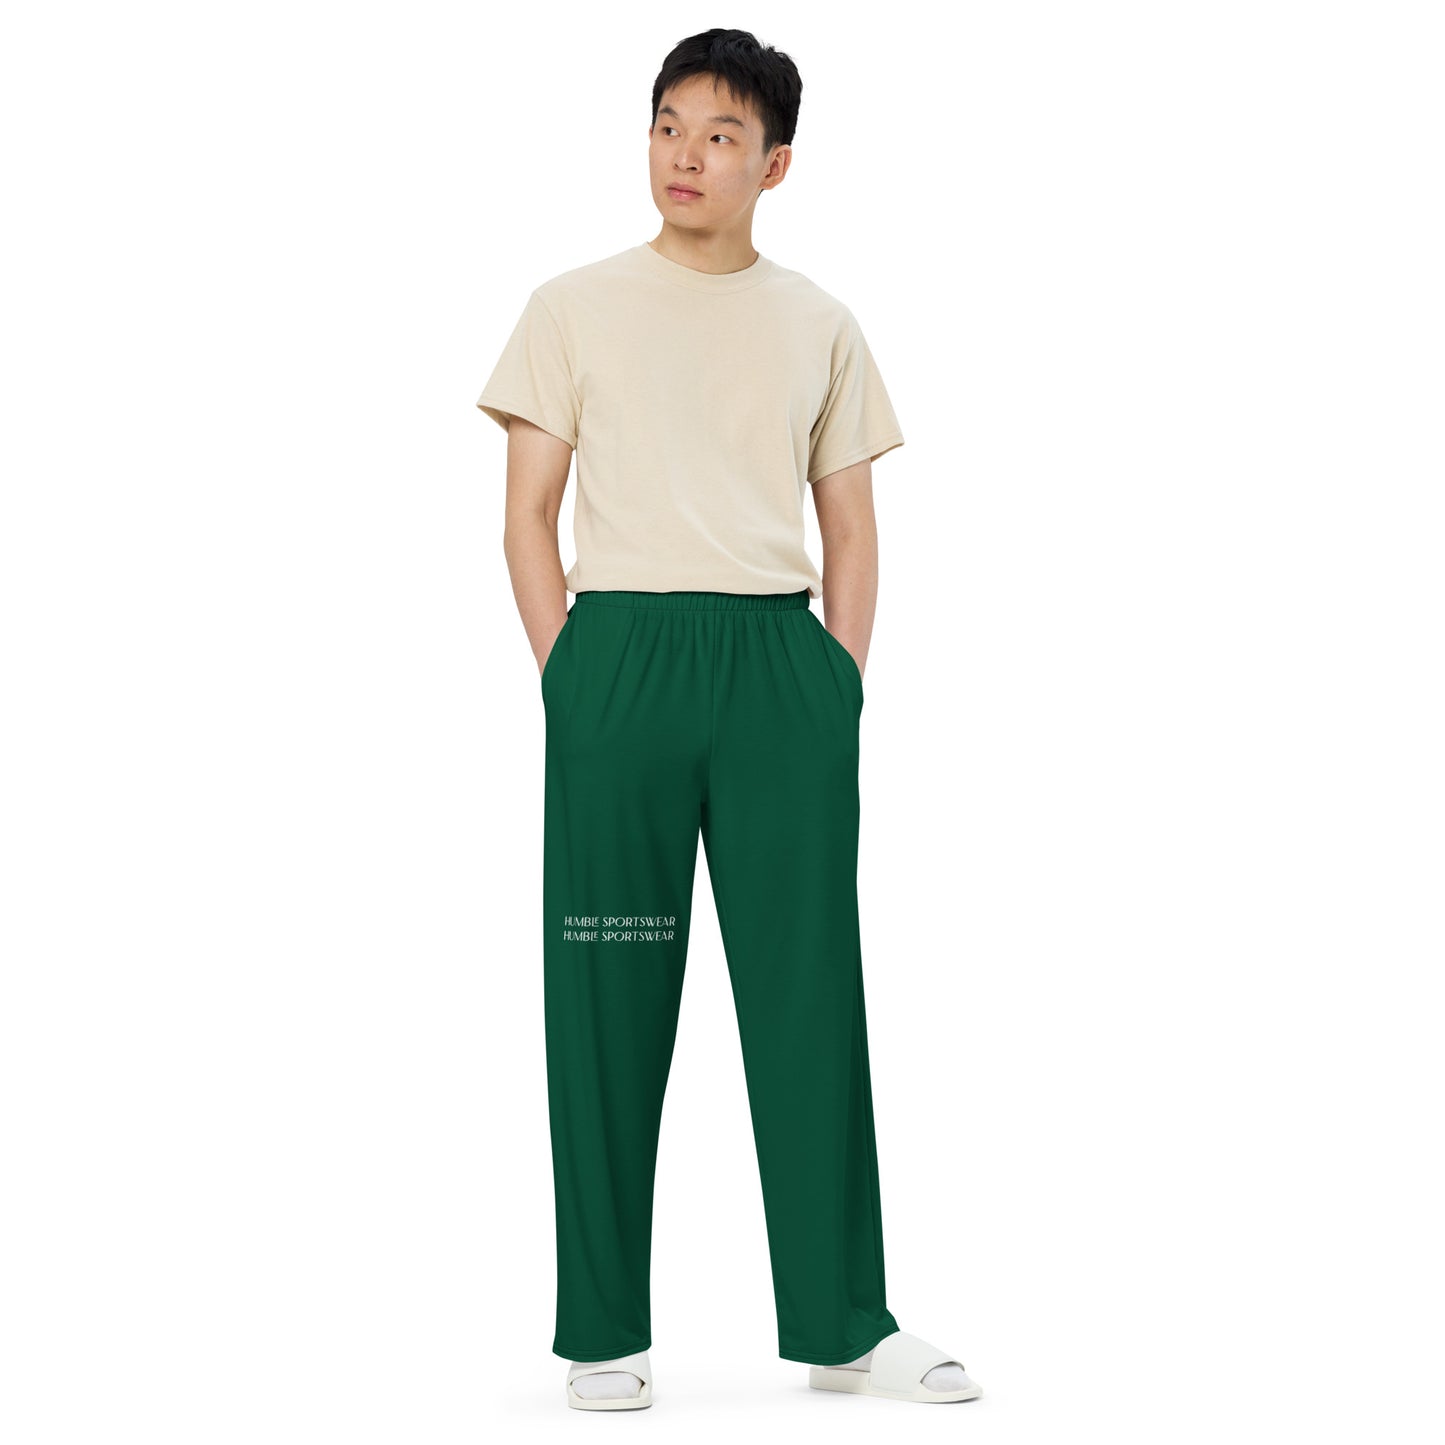 Humble Sportswear, men's color match active and loungewear wide-leg pants green